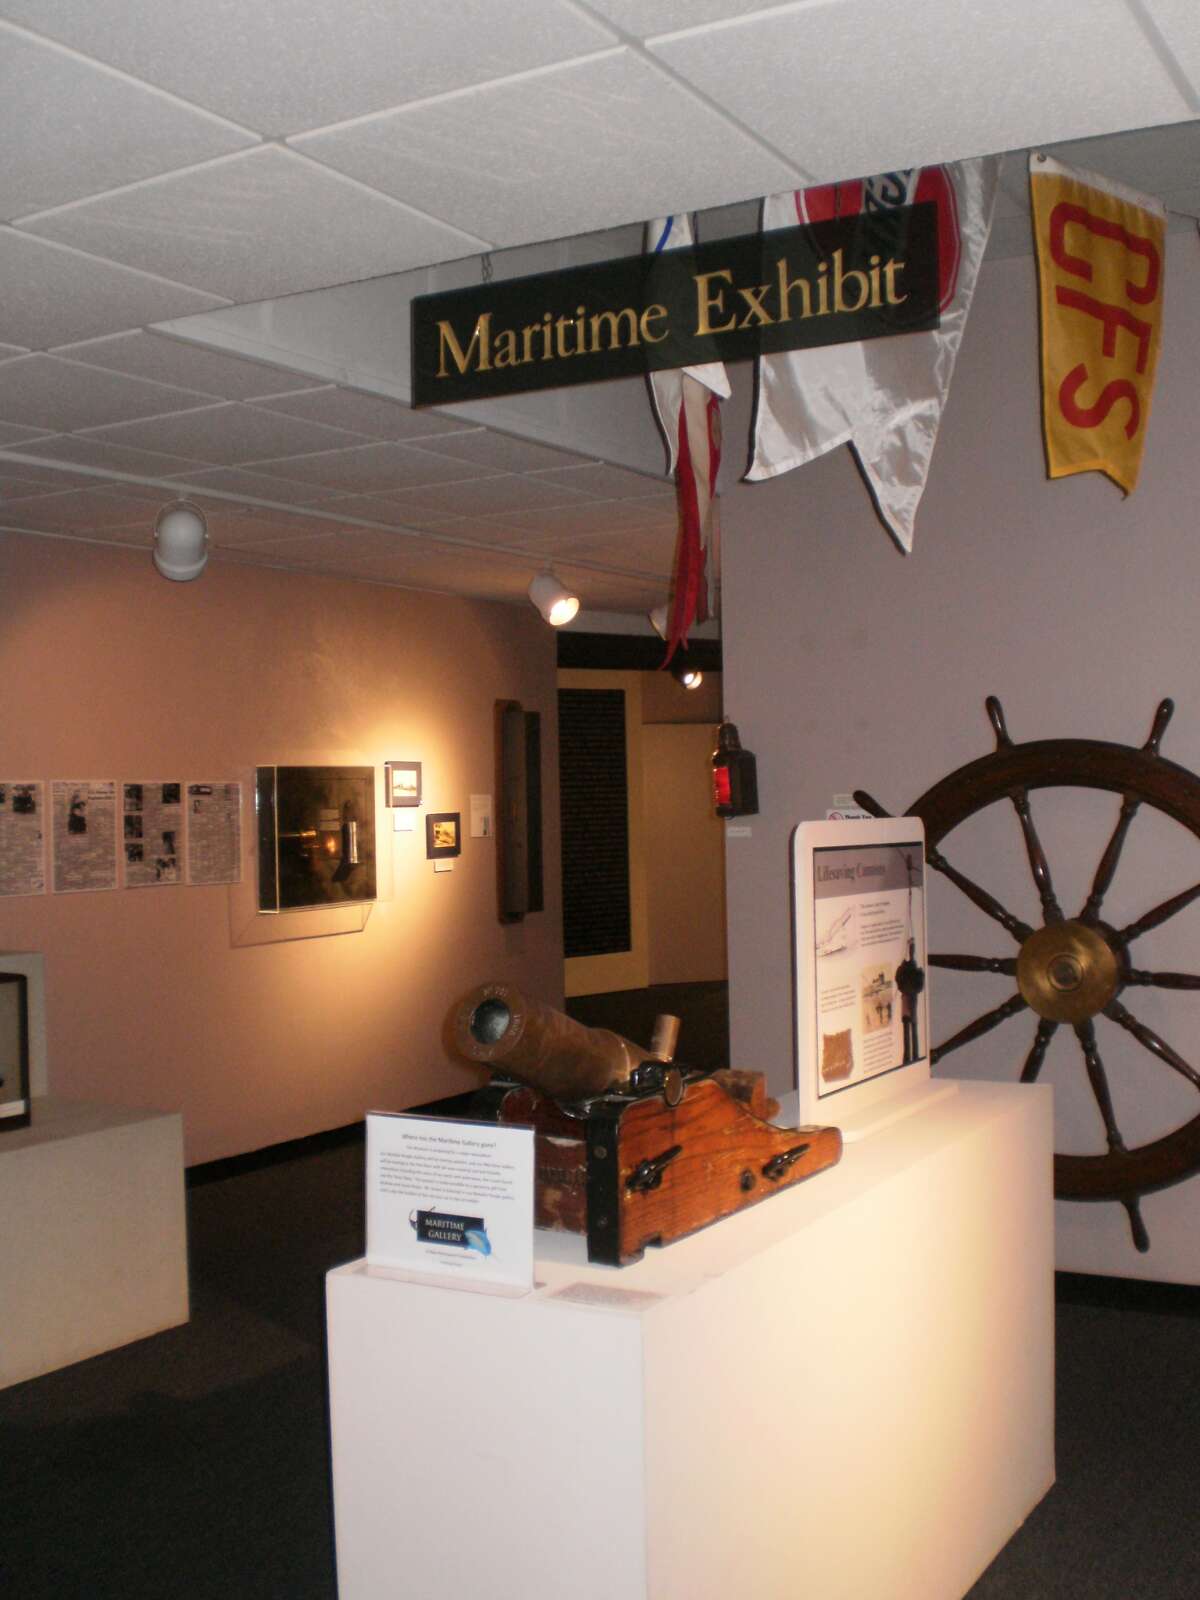 The Museum of the Gulf Coast will unveil its new exhibit, Texas-Navy Maritime Gallery, on Friday, Dec. 15, 2017. Photo courtesy of the Museum of the Gulf Coast.